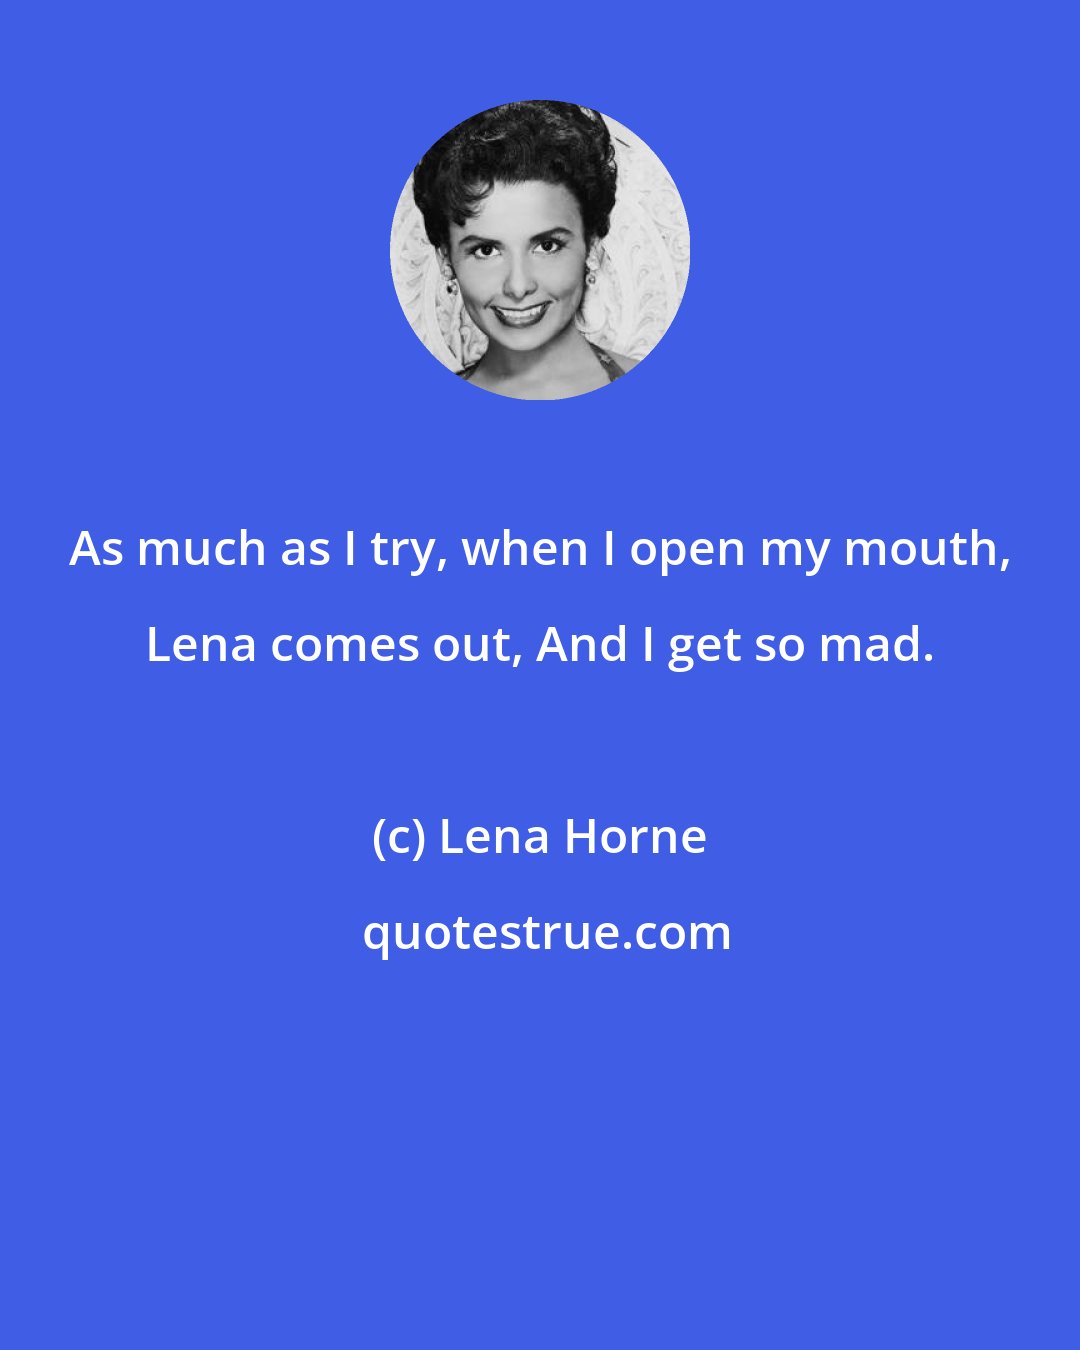 Lena Horne: As much as I try, when I open my mouth, Lena comes out, And I get so mad.